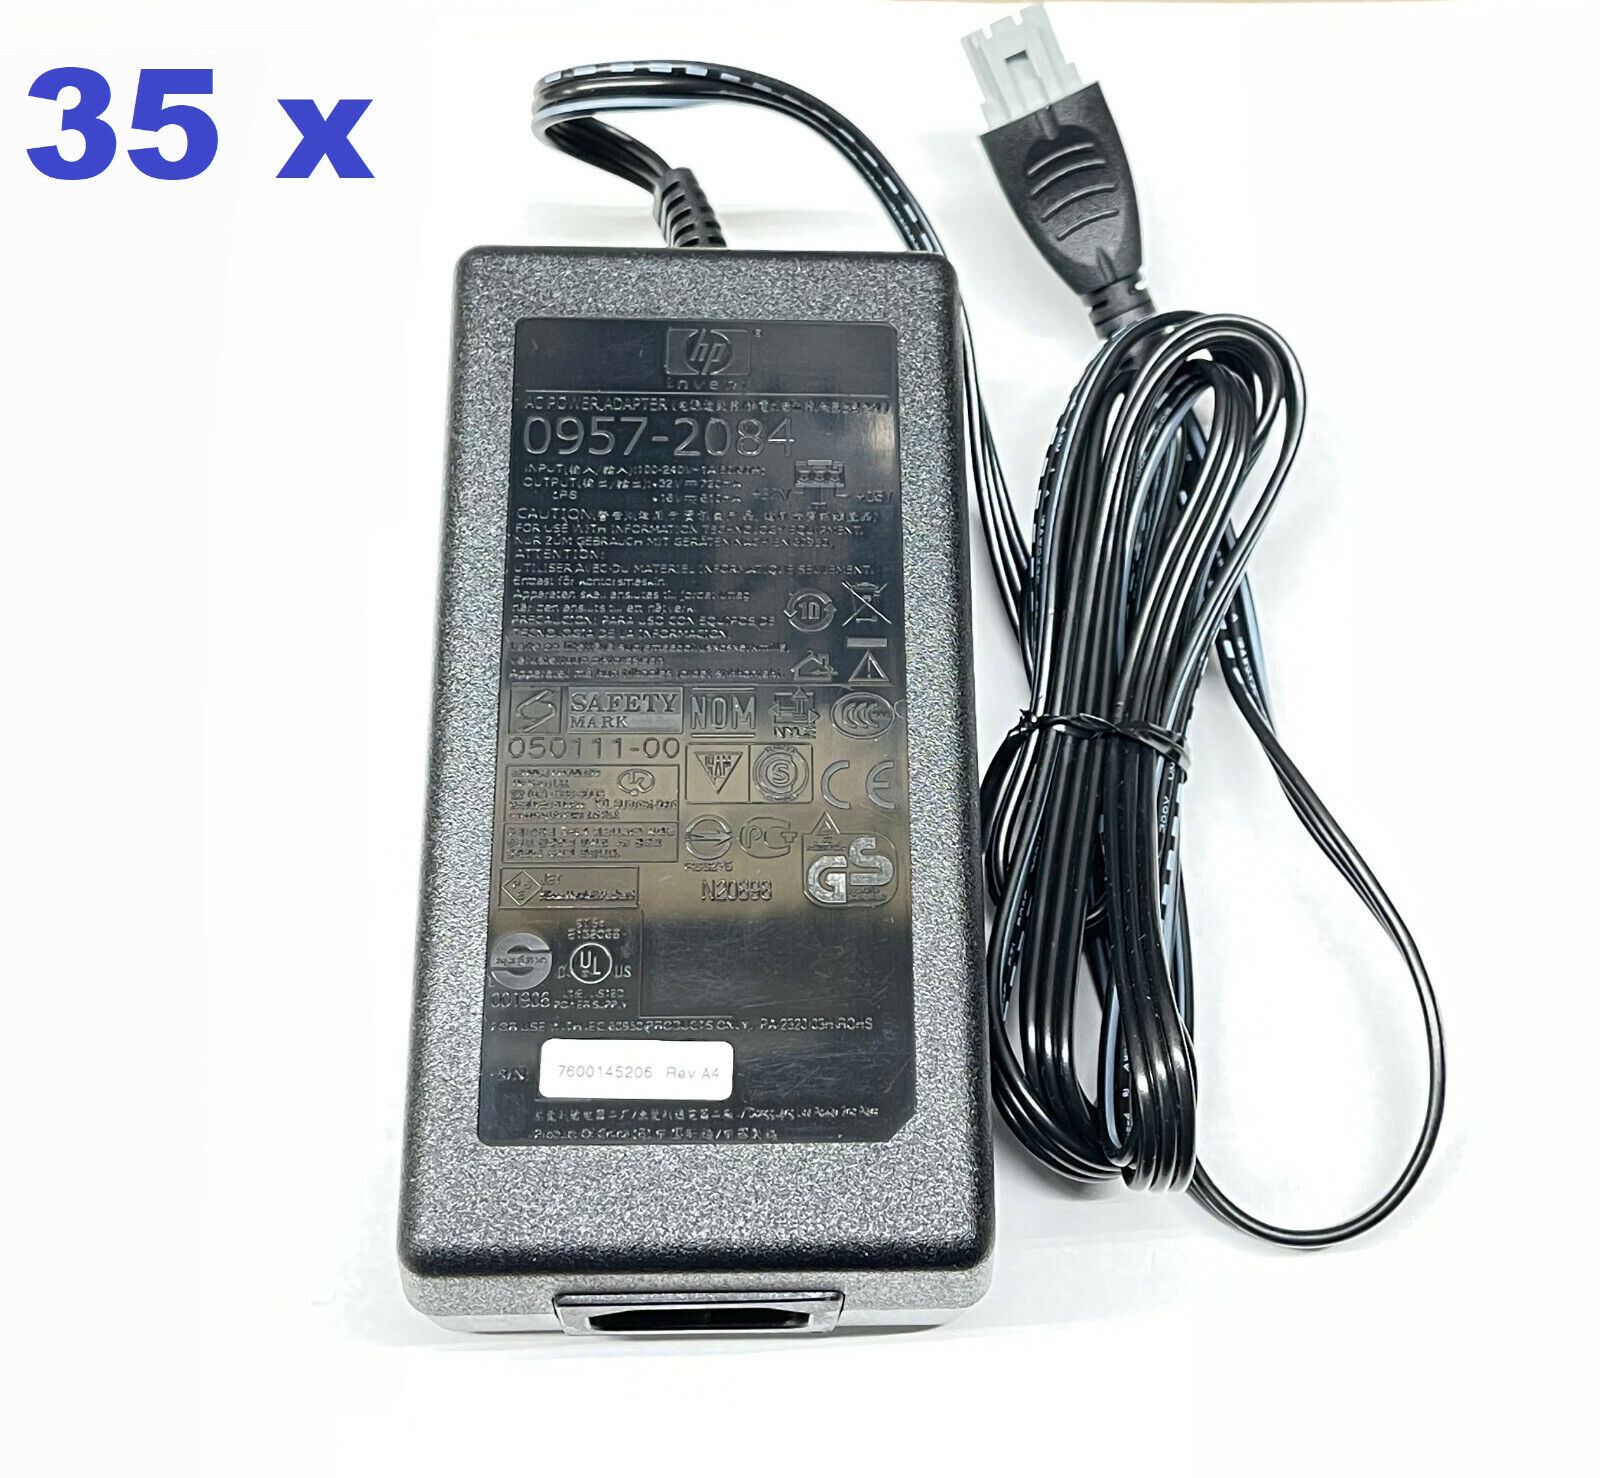 New HP 0957-2084 16V 610mA 32V 720mA AC Adapter For HP Printers - Lot Of 35